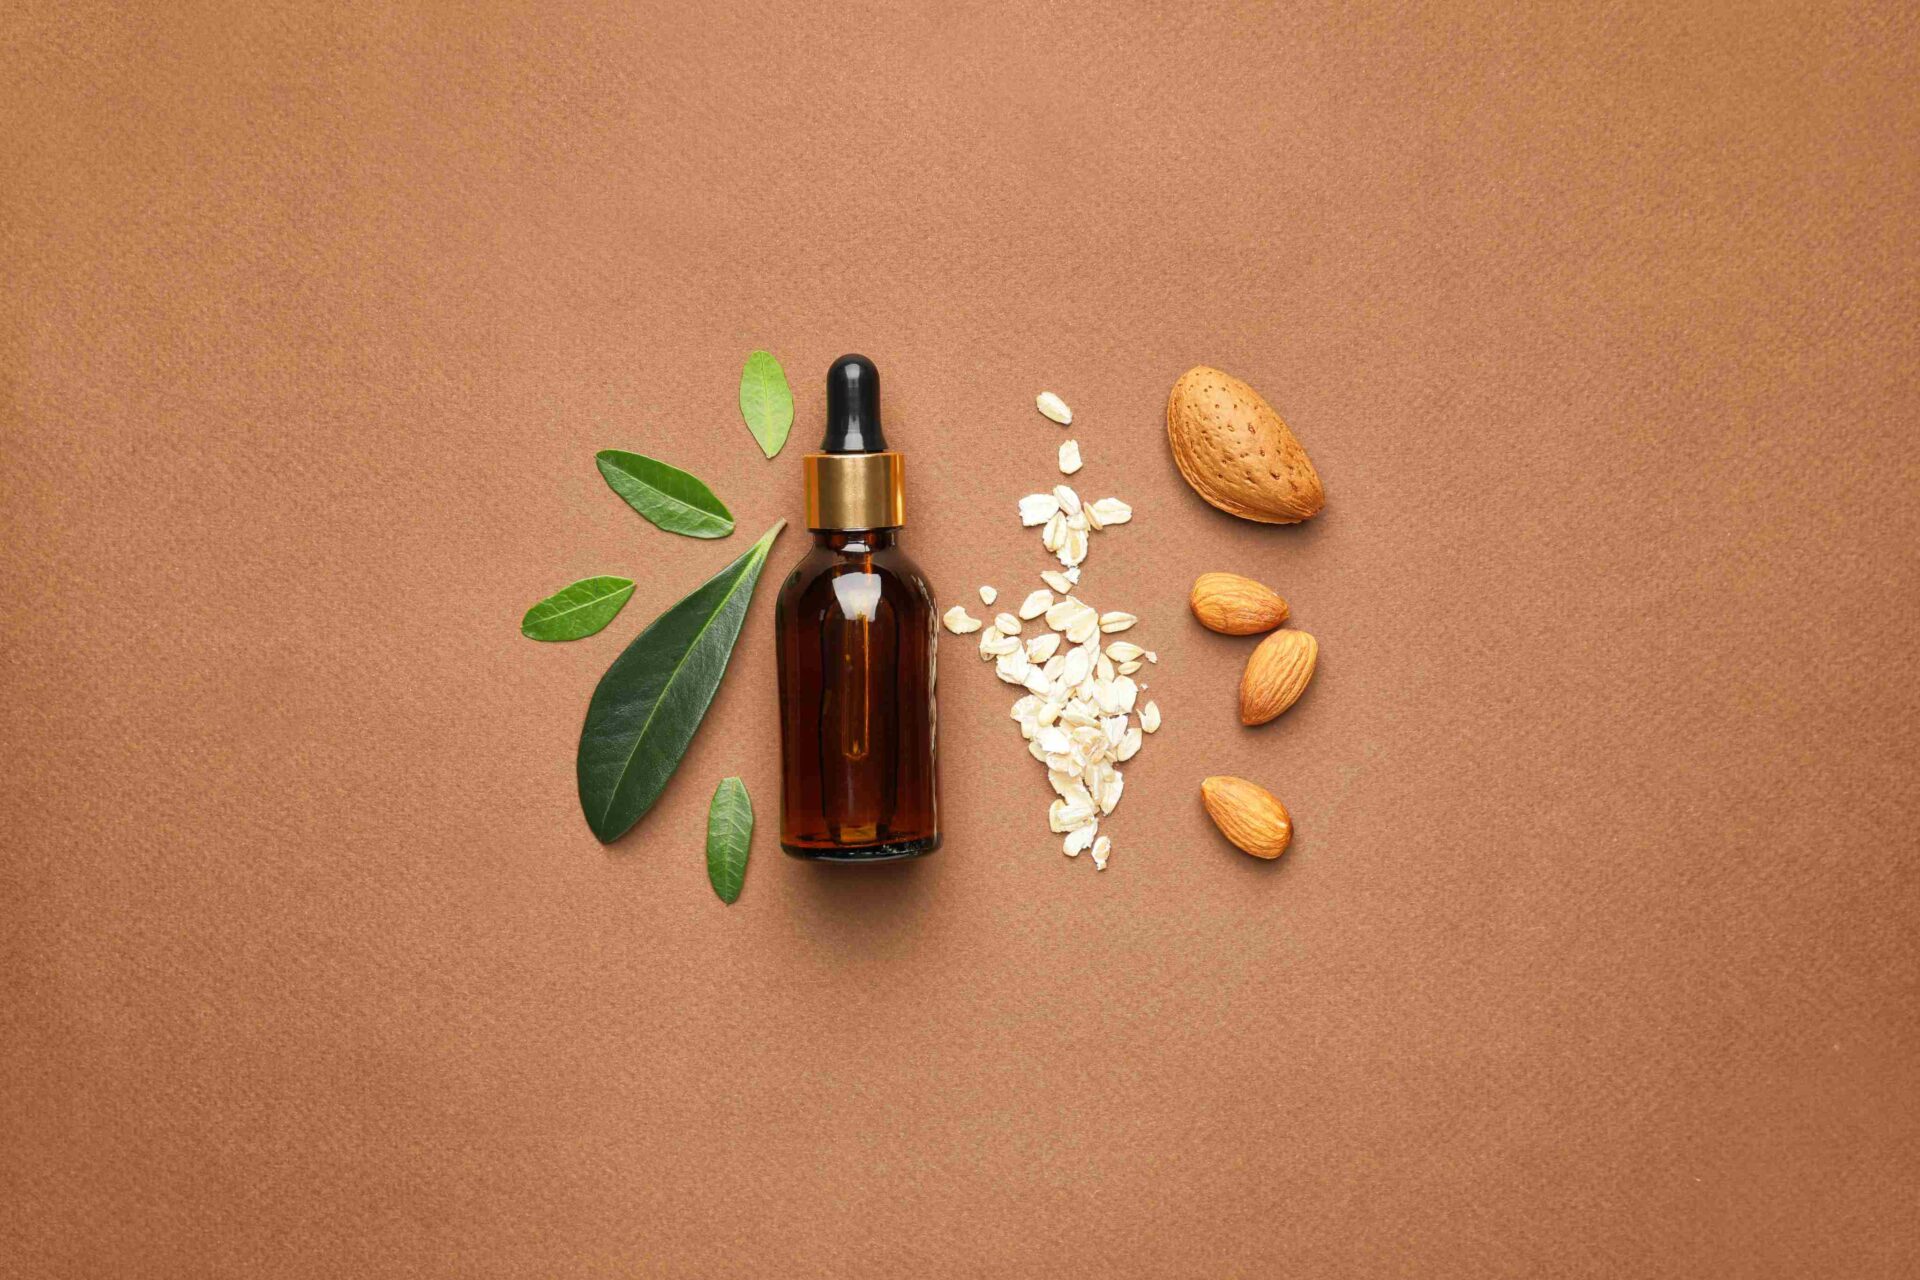 A Bottle of Perfume Lined up Next to Leaves and Almonds - Almond Oil in Cosmetics and Beauty Products